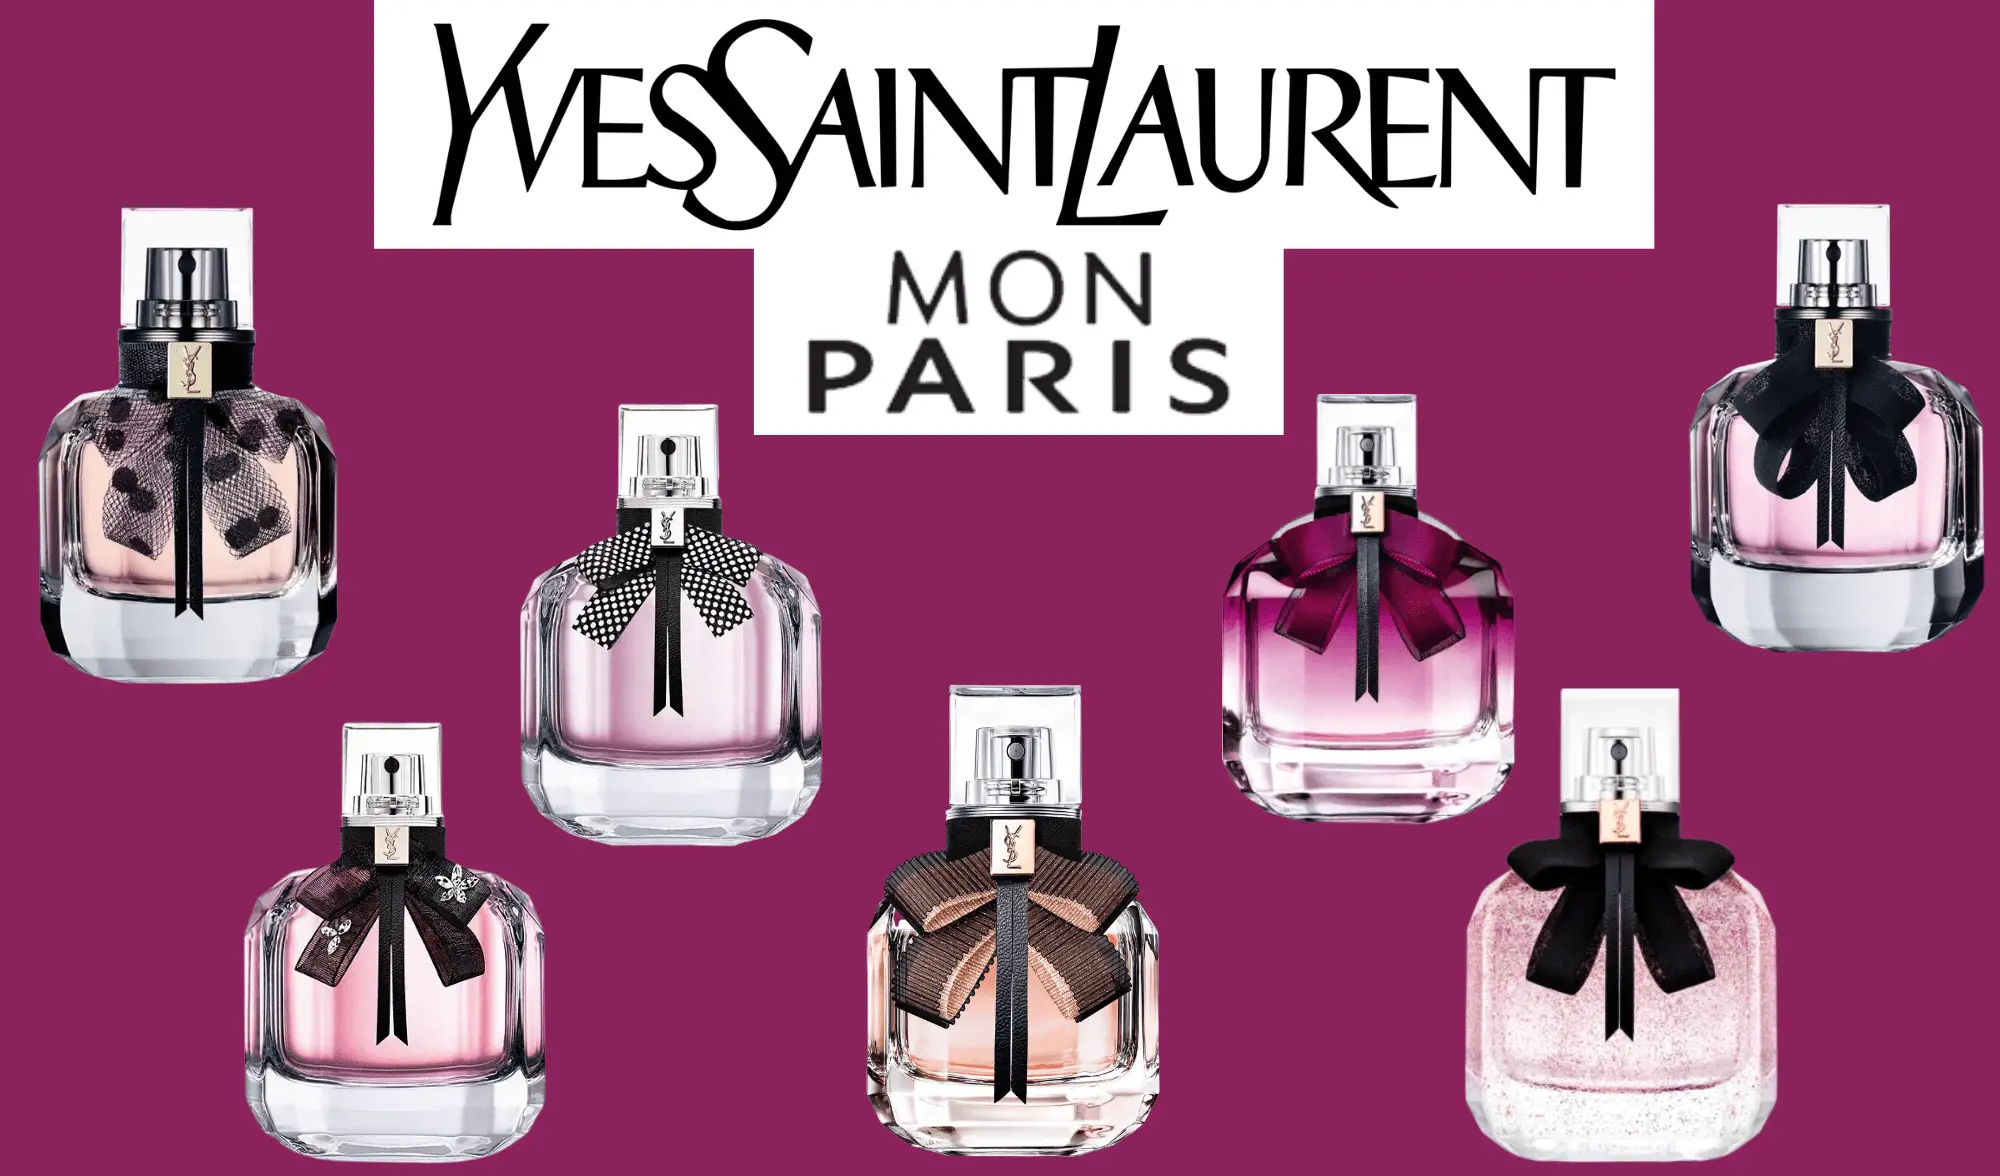 The Ultimate Guide To The YSL Mon Paris Perfume Range